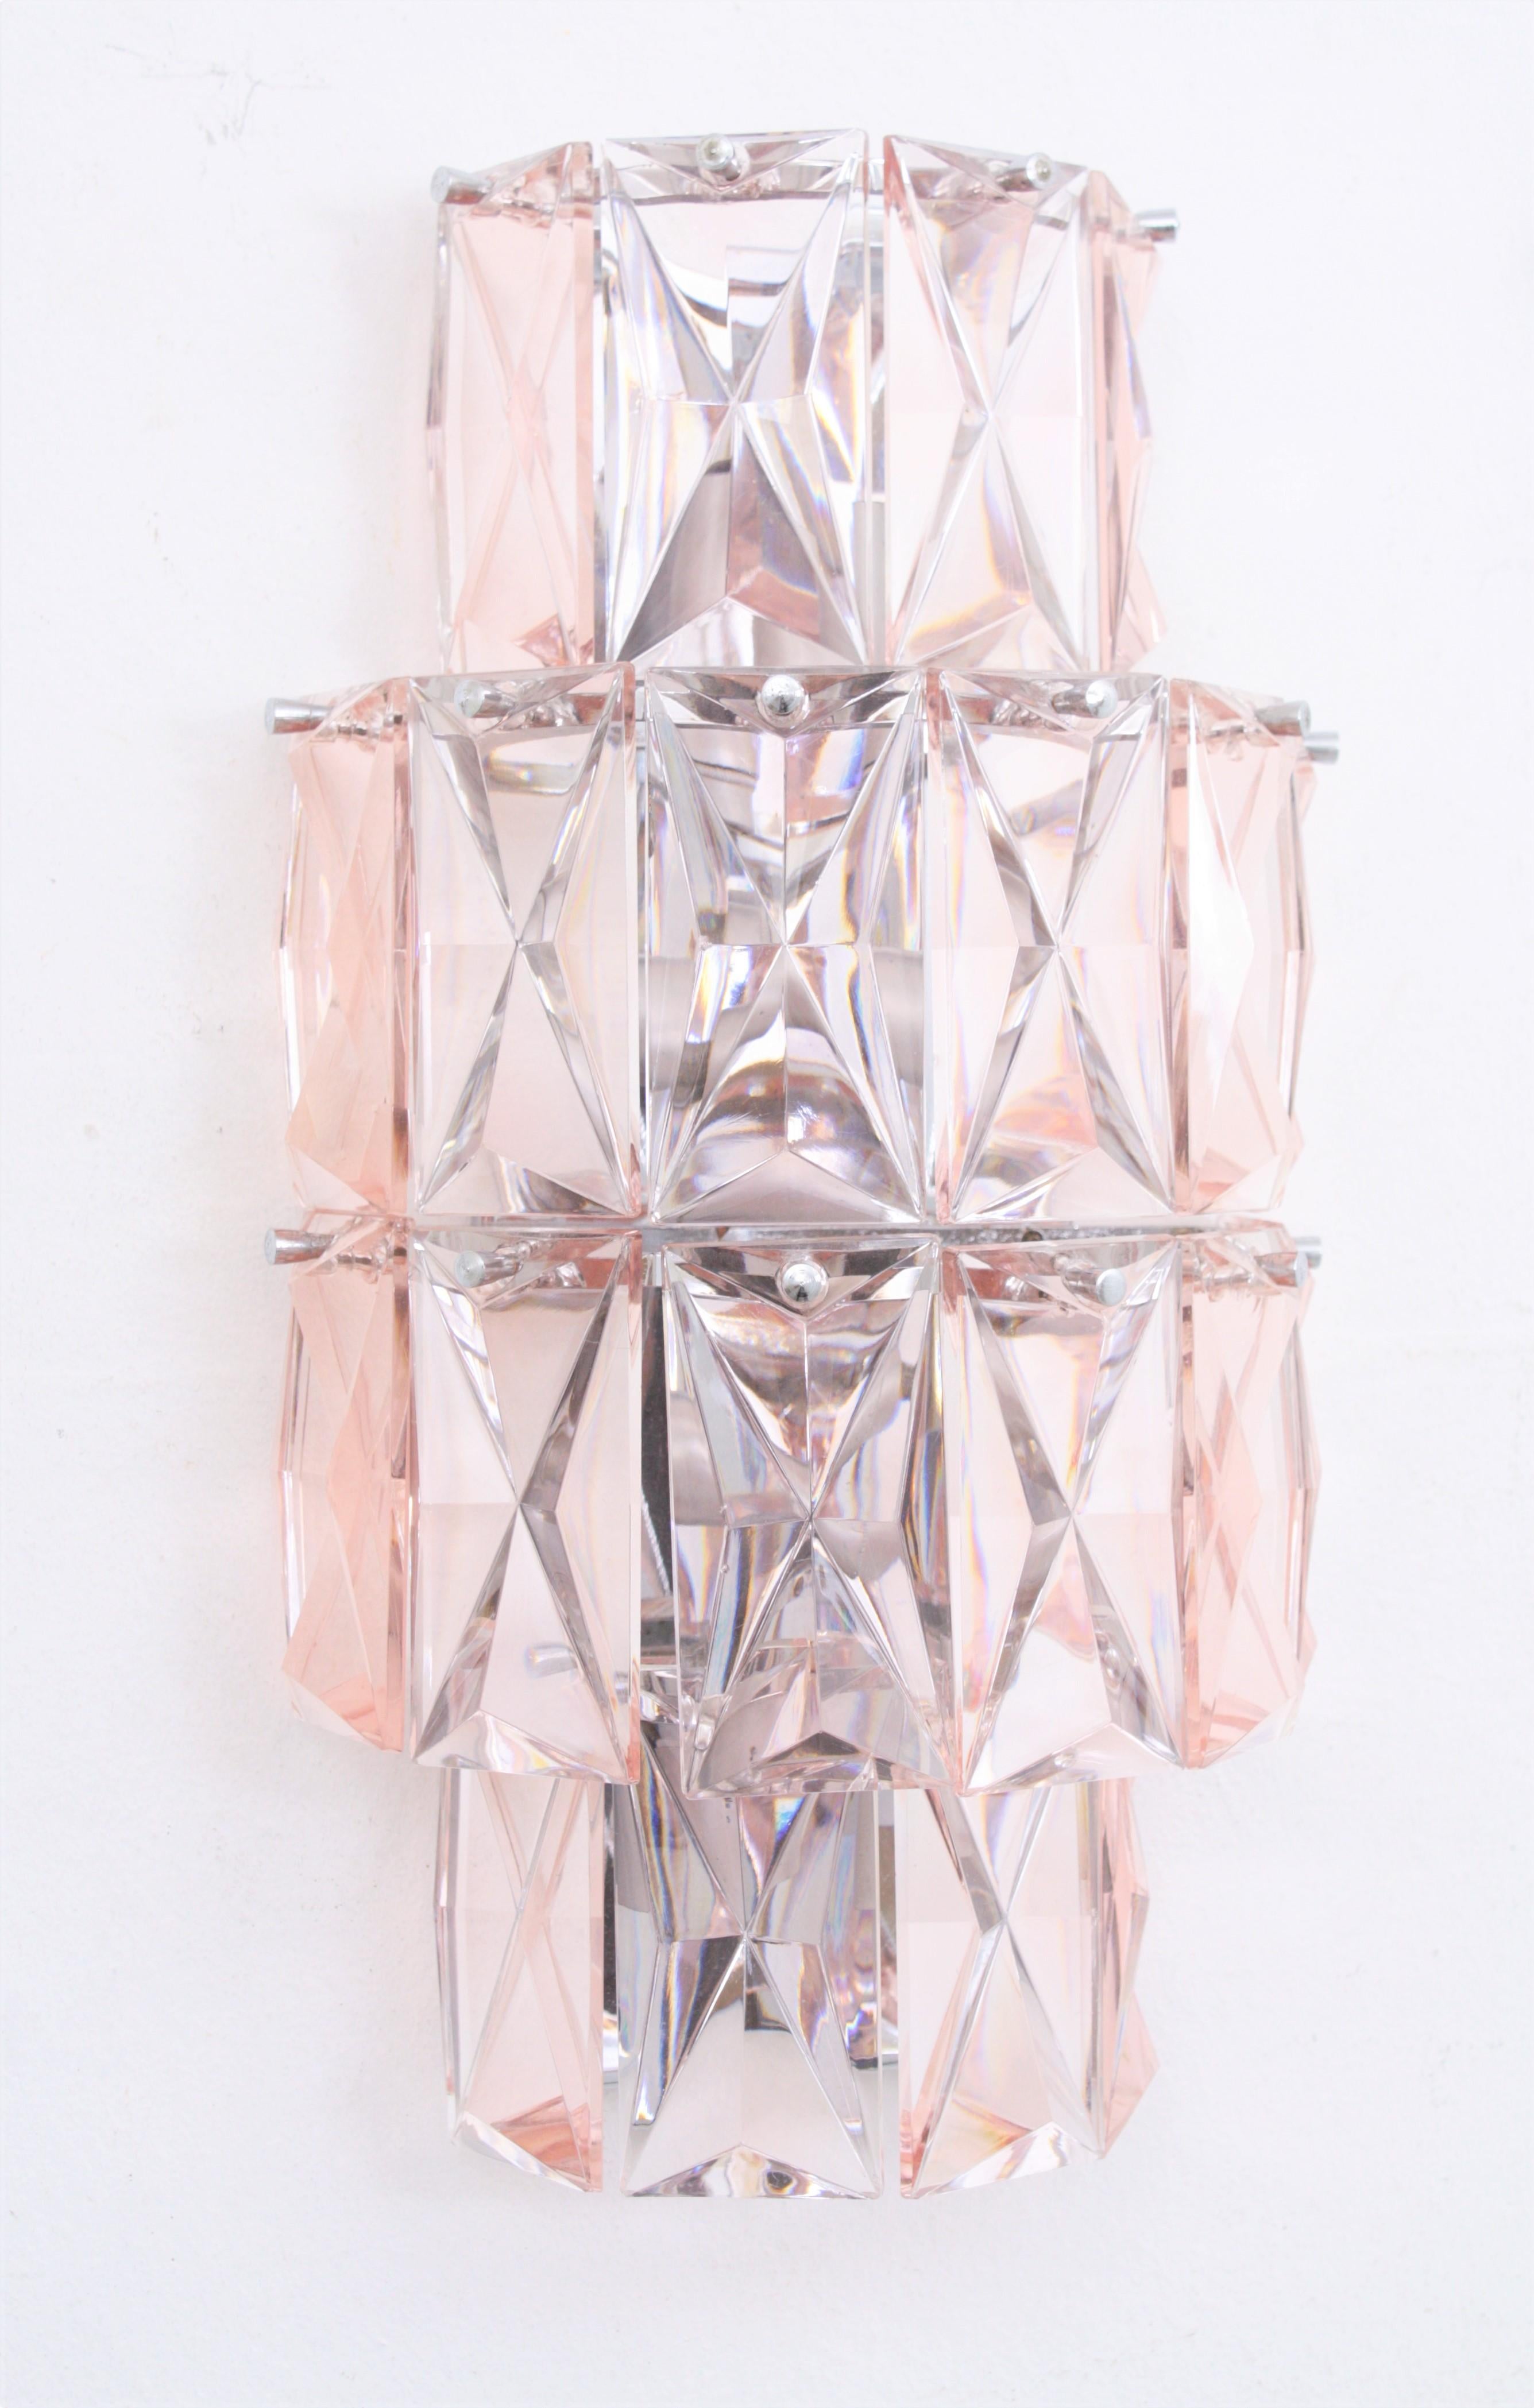 Large Mid-Century Modern pink crystal wall sconce attributed to Baccarat, France, 1960s
This wall sconce has 20 rectangular shaped pink crystal pieces distributed in four tiers and mounted on a metal chromed backplate.
Holds four candelabra E14